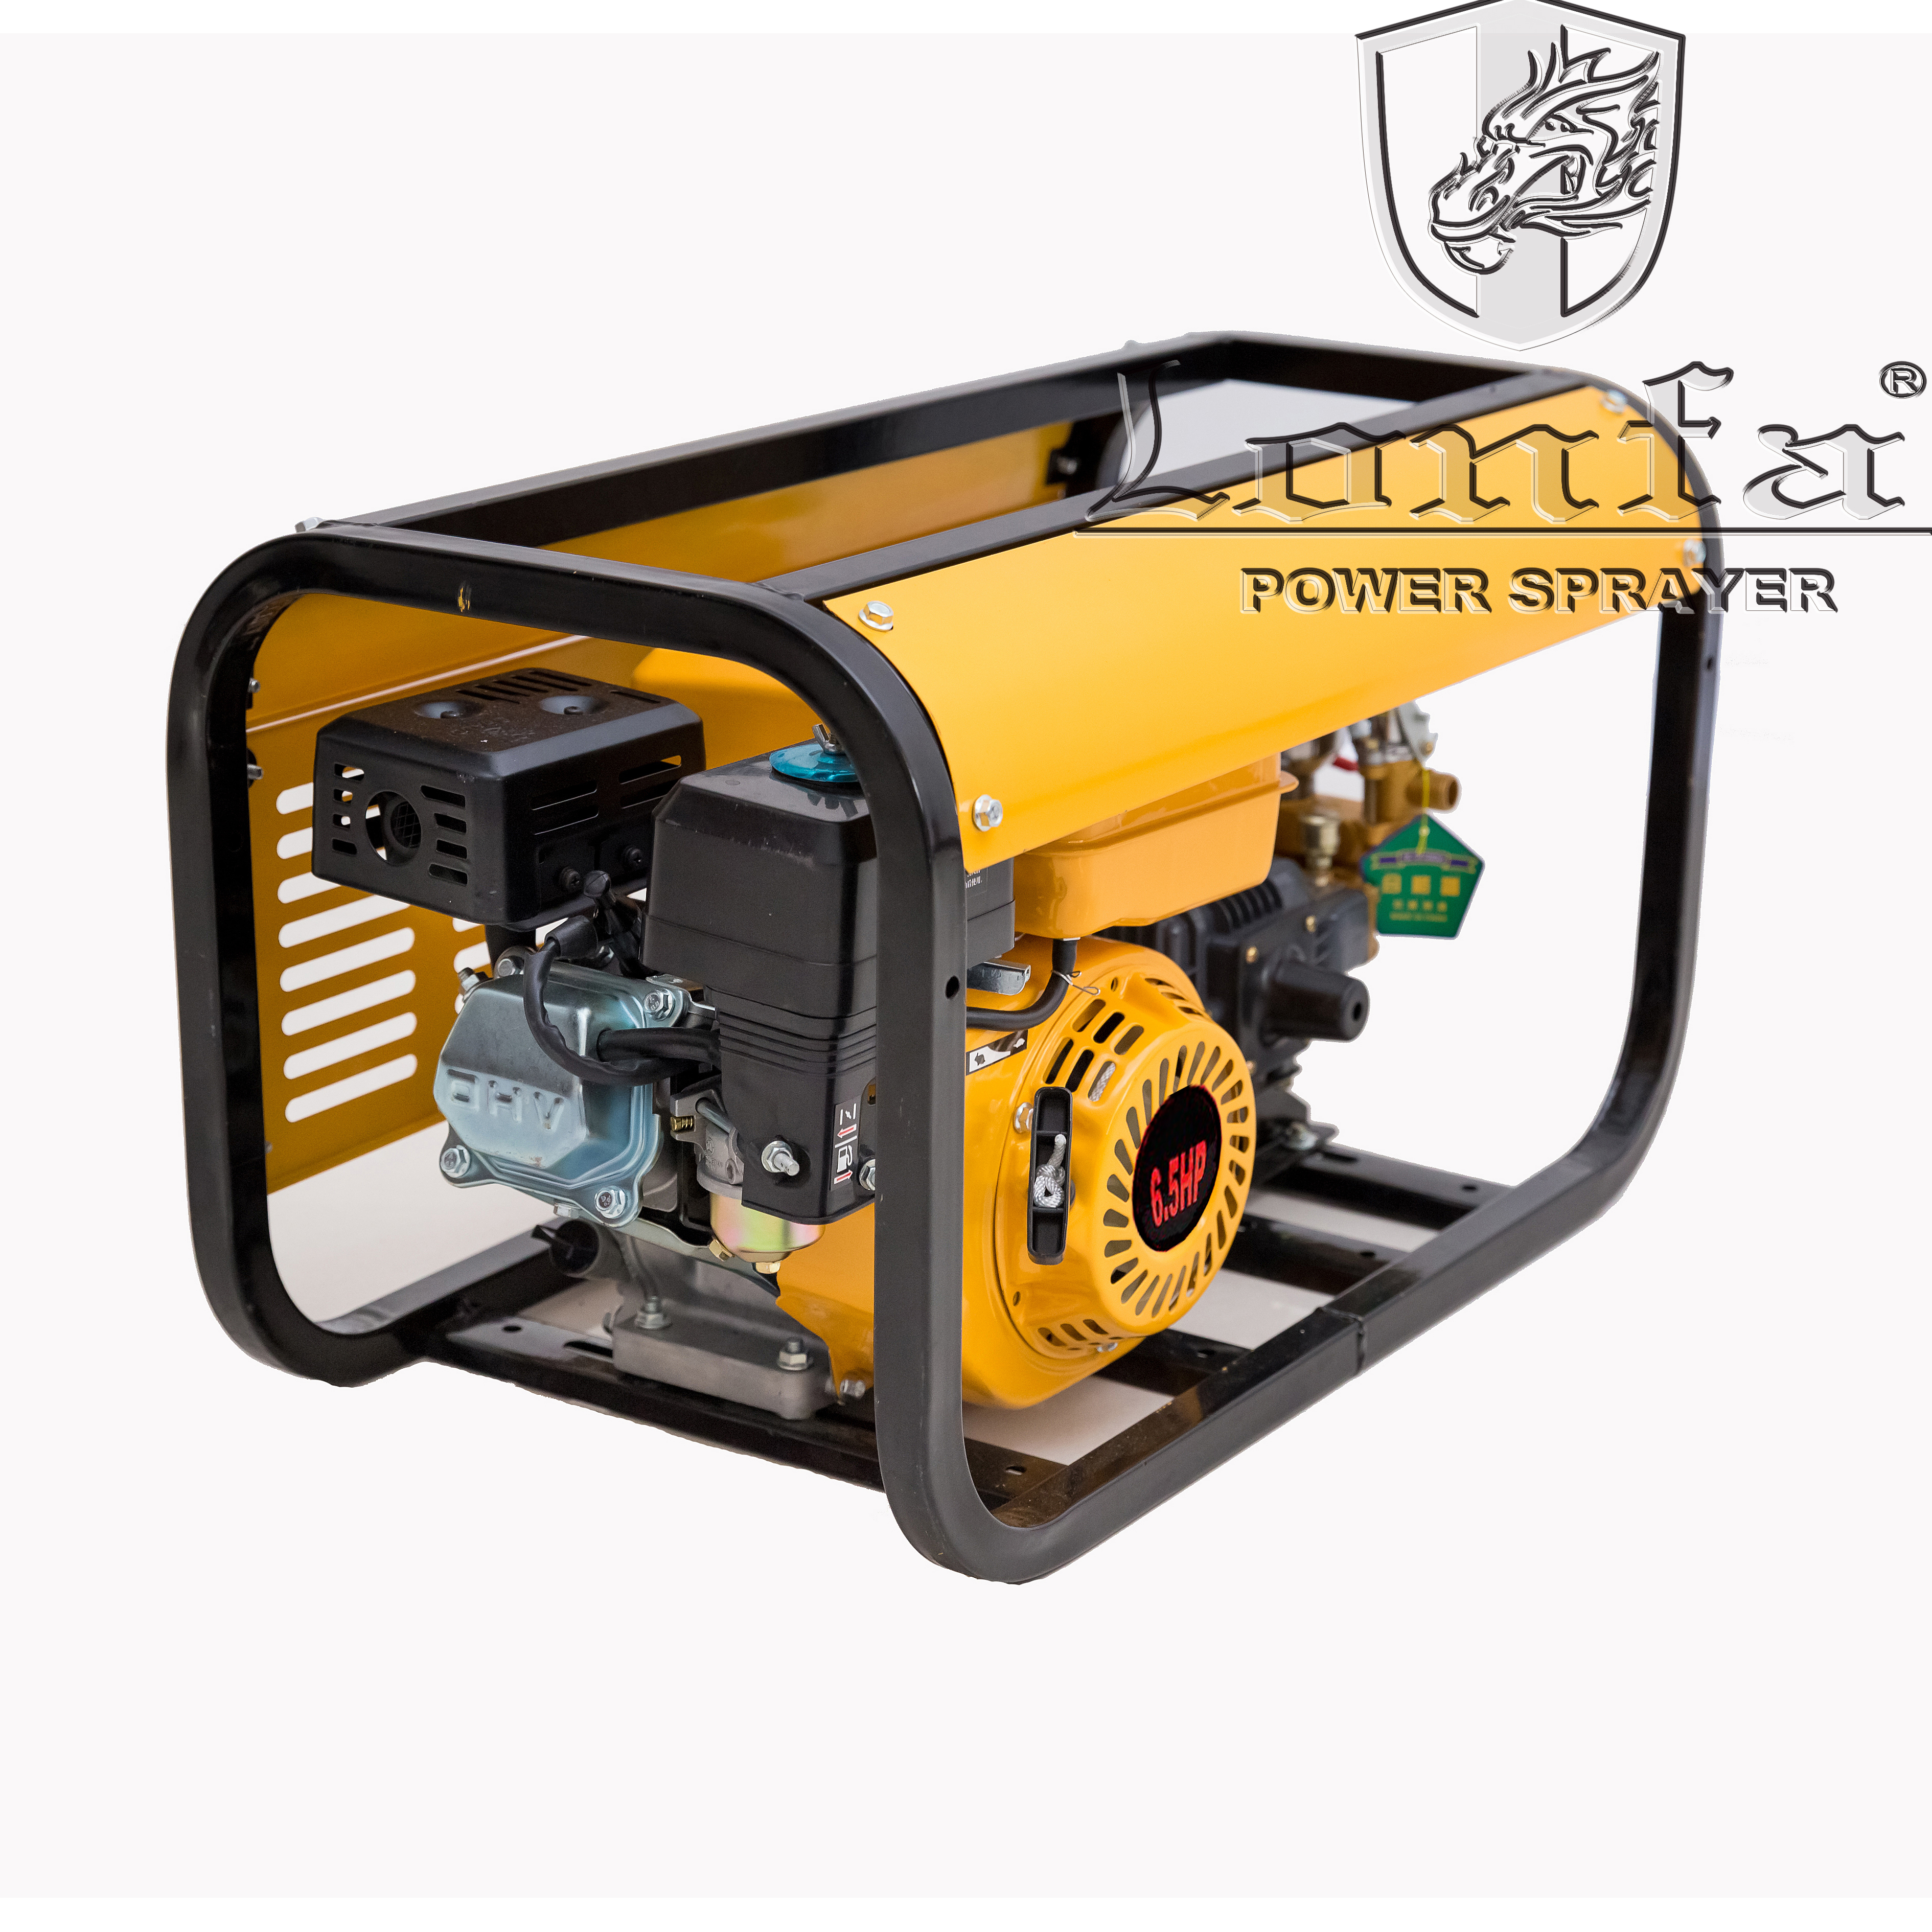 China quality high pressure agricultural 5.5hp gasoline power sprayer